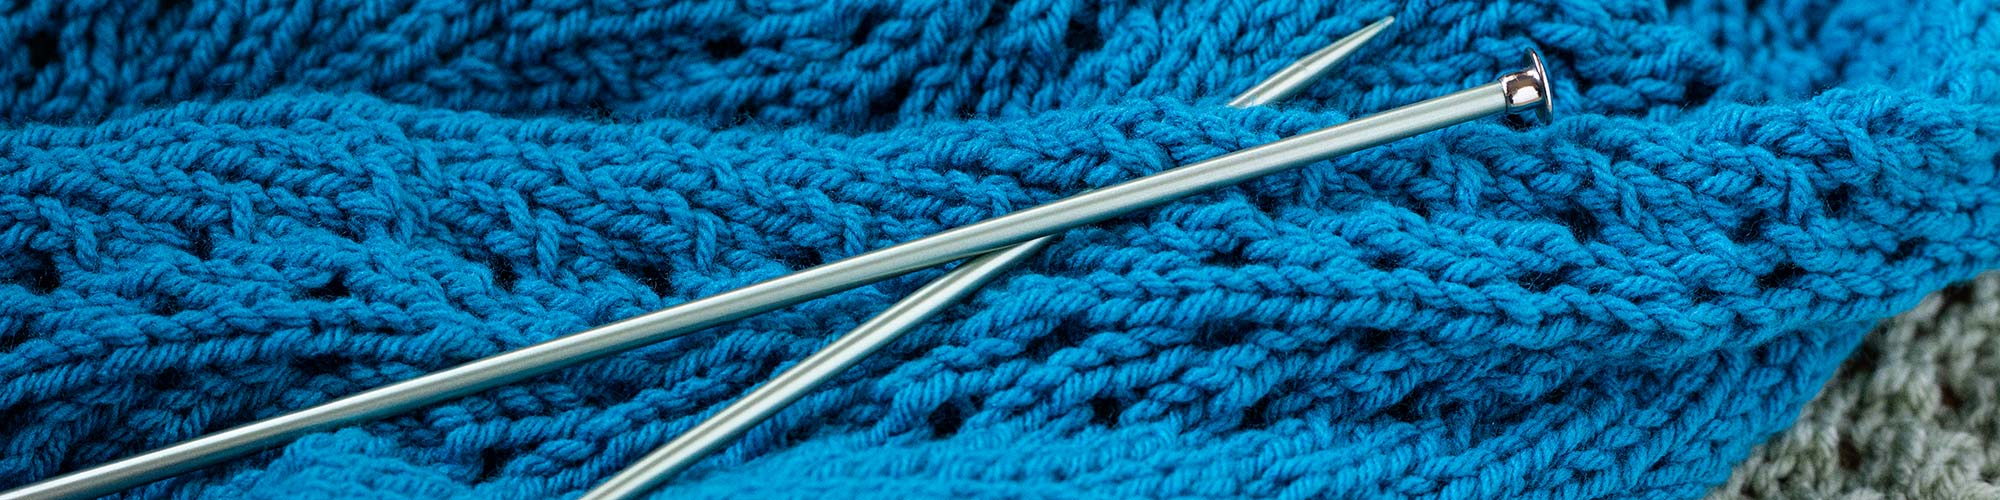 detail of knitting needles and two knit prayer shawls